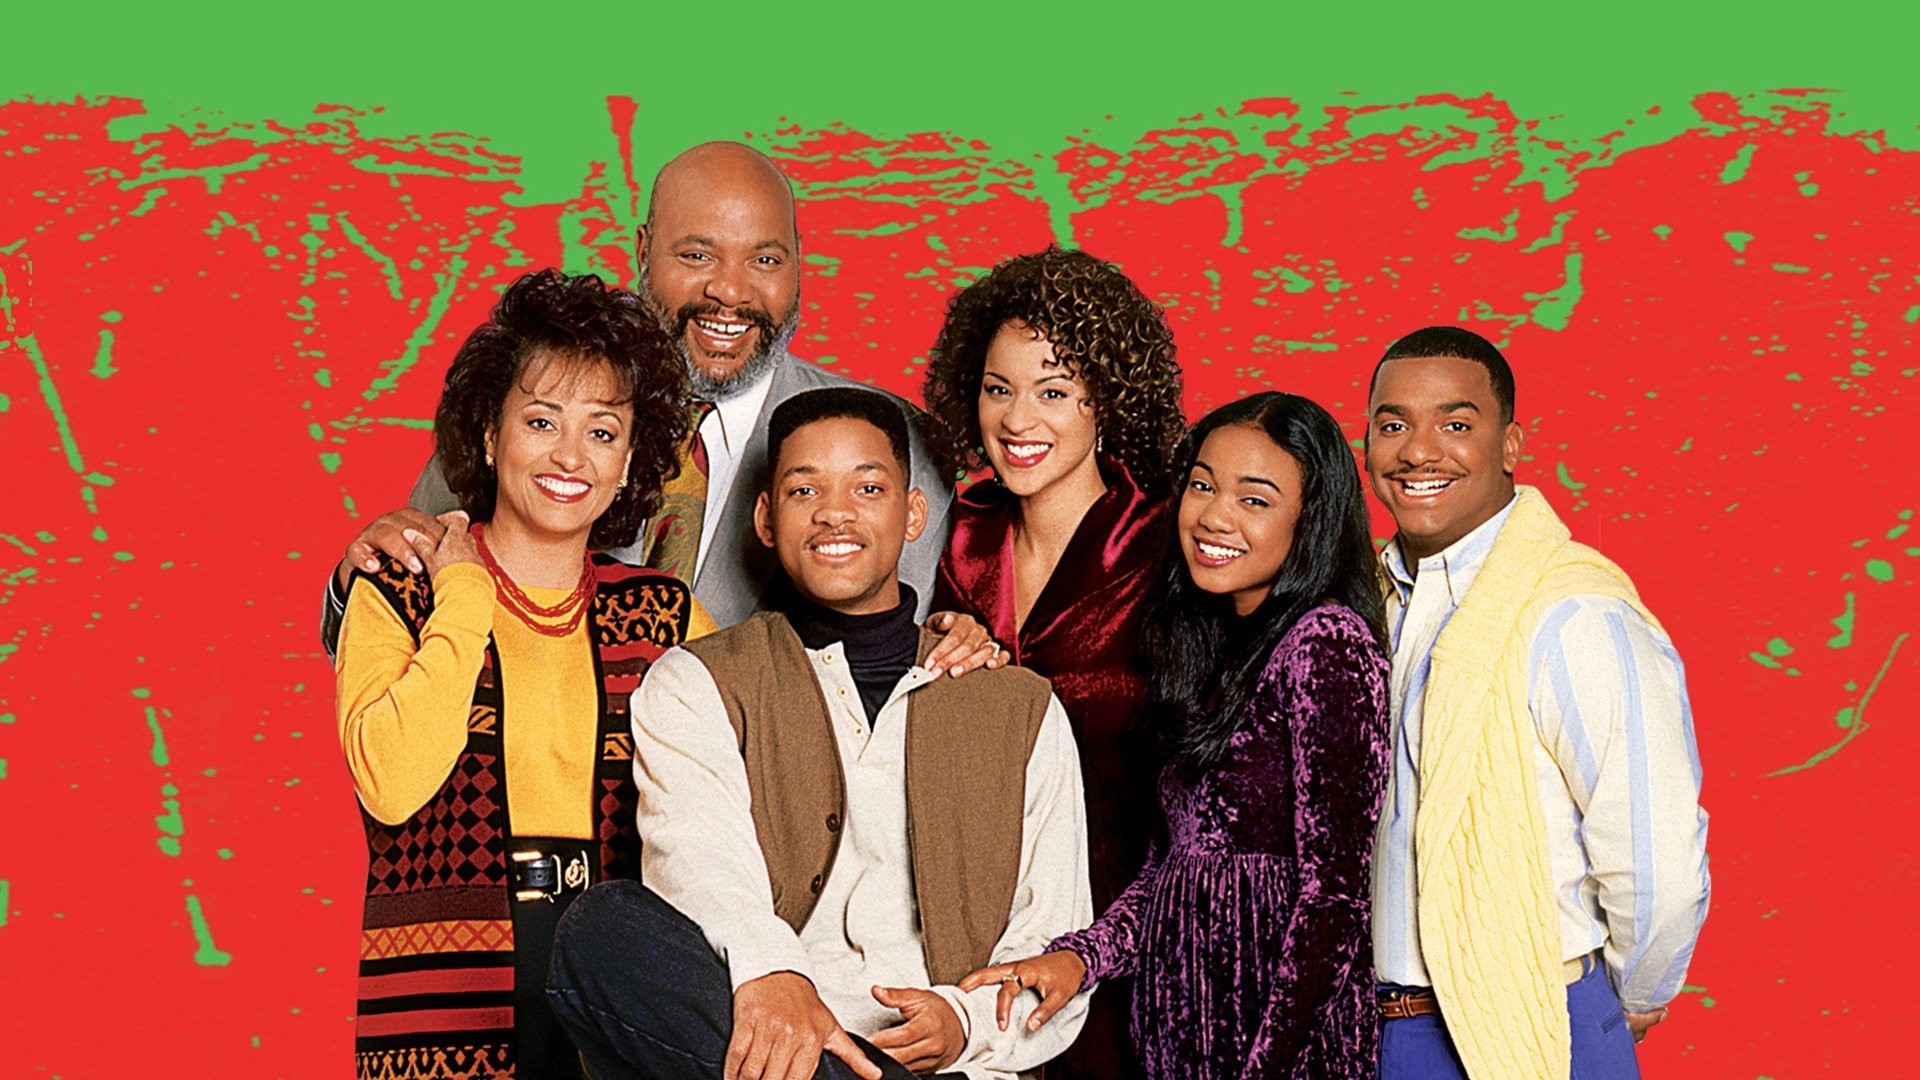 Meet ‘The Fresh Prince of Bel-Air’ The Cast Net Worth Explored